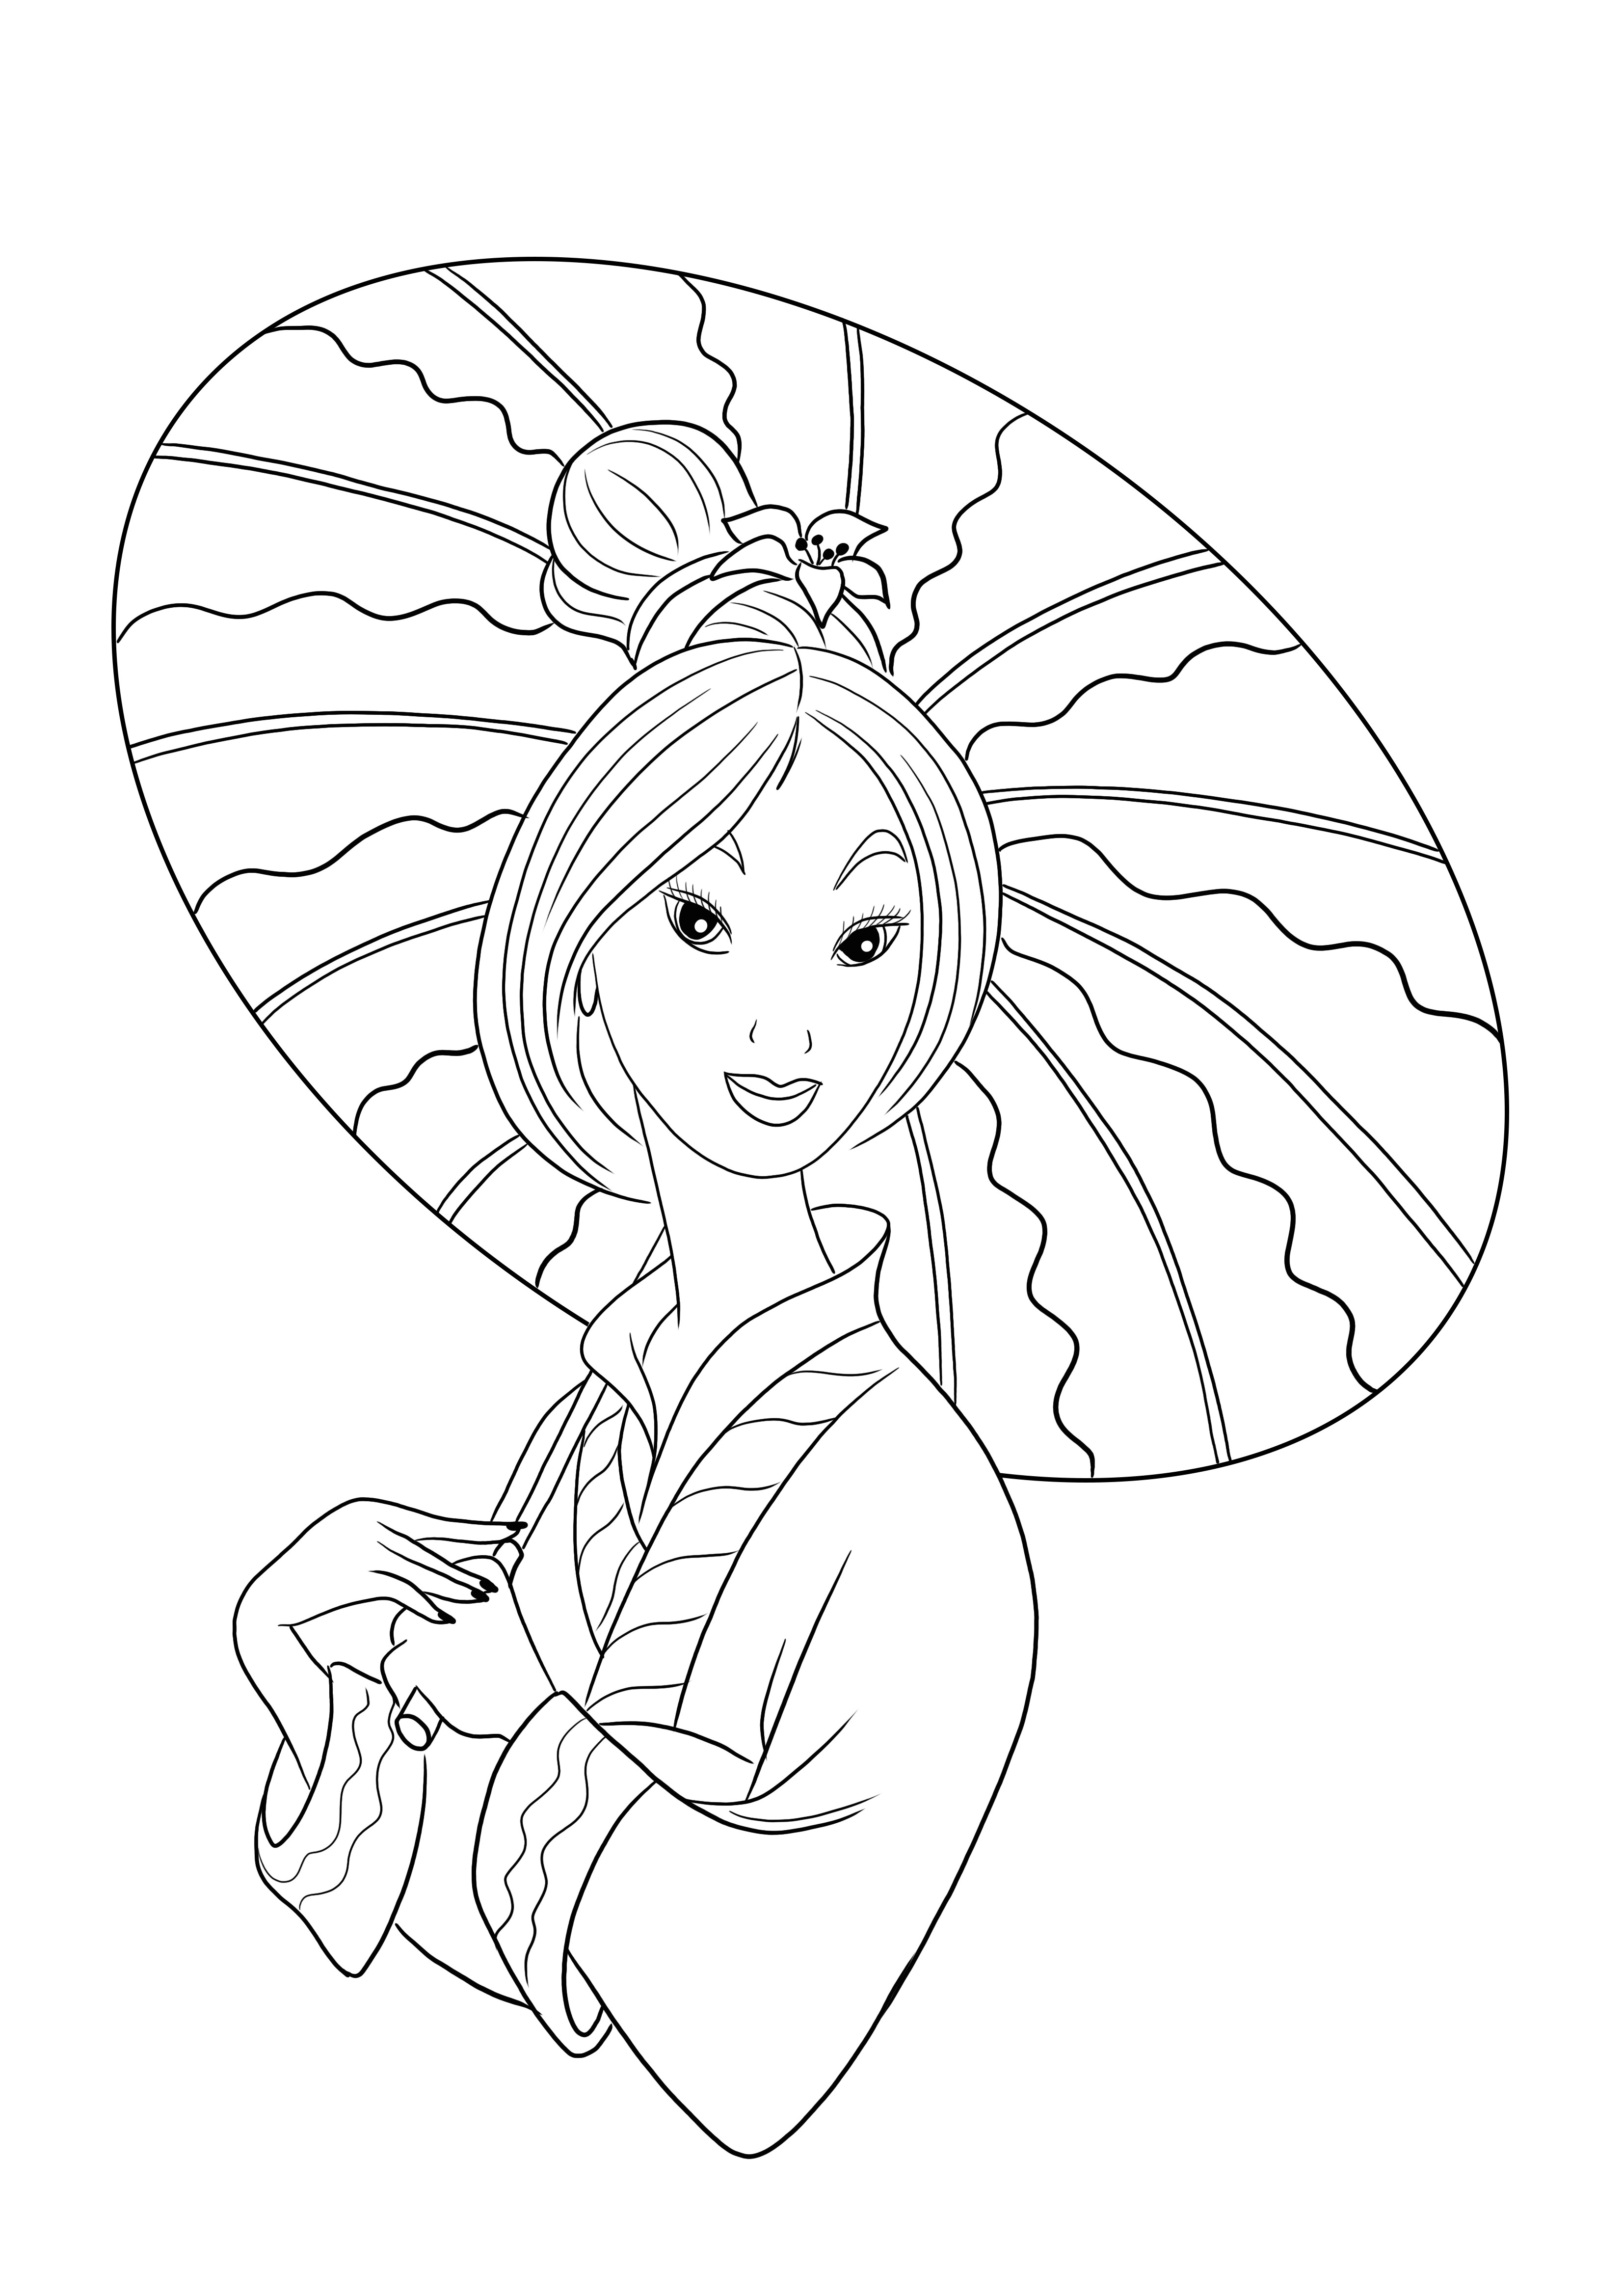 Princess Mulan free for coloring and printing picture for kids to have fun